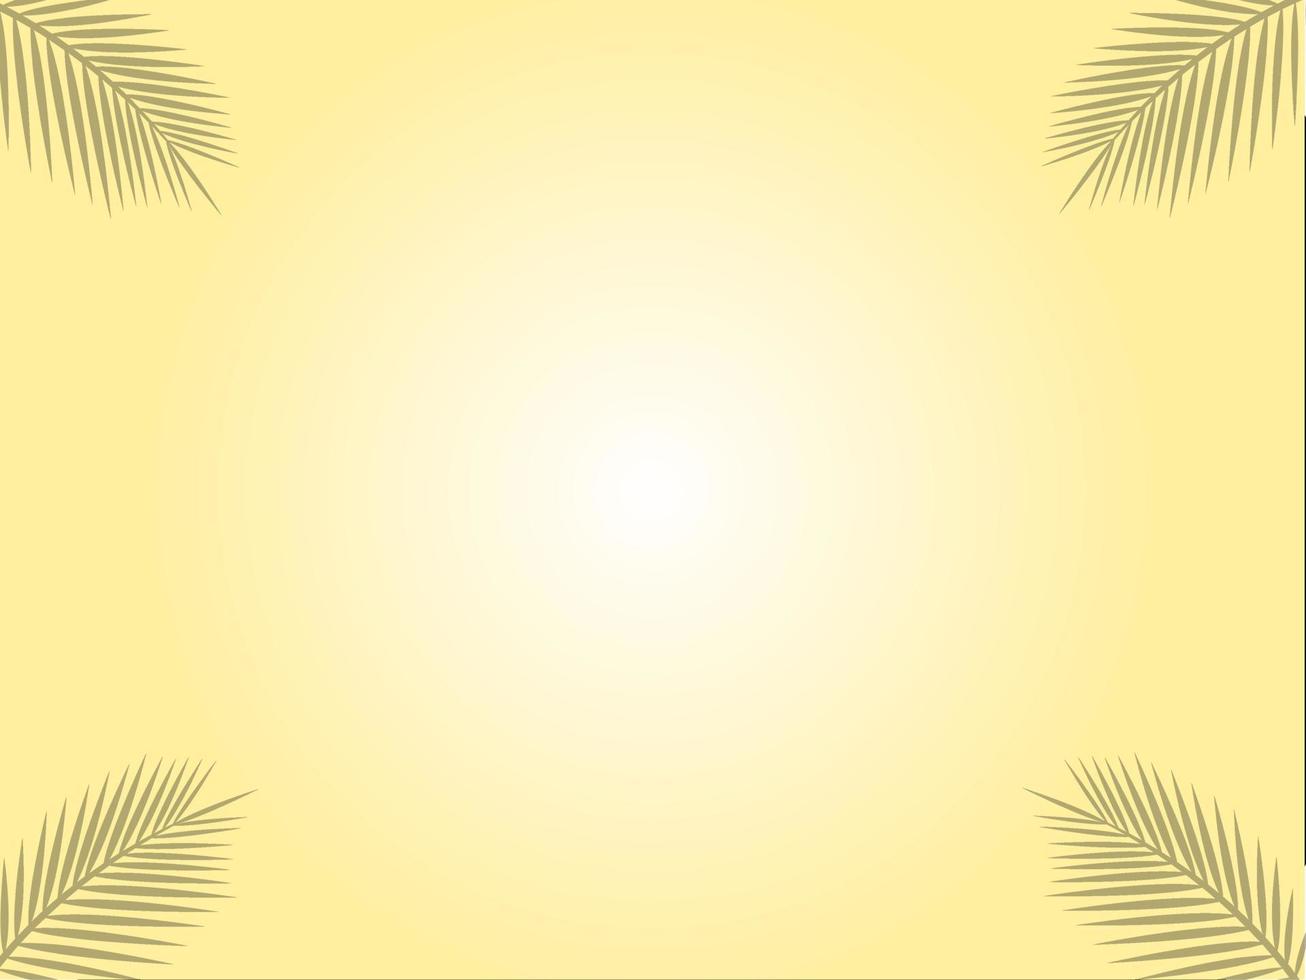 TREE WITH YELLOW BACKGROUND vector